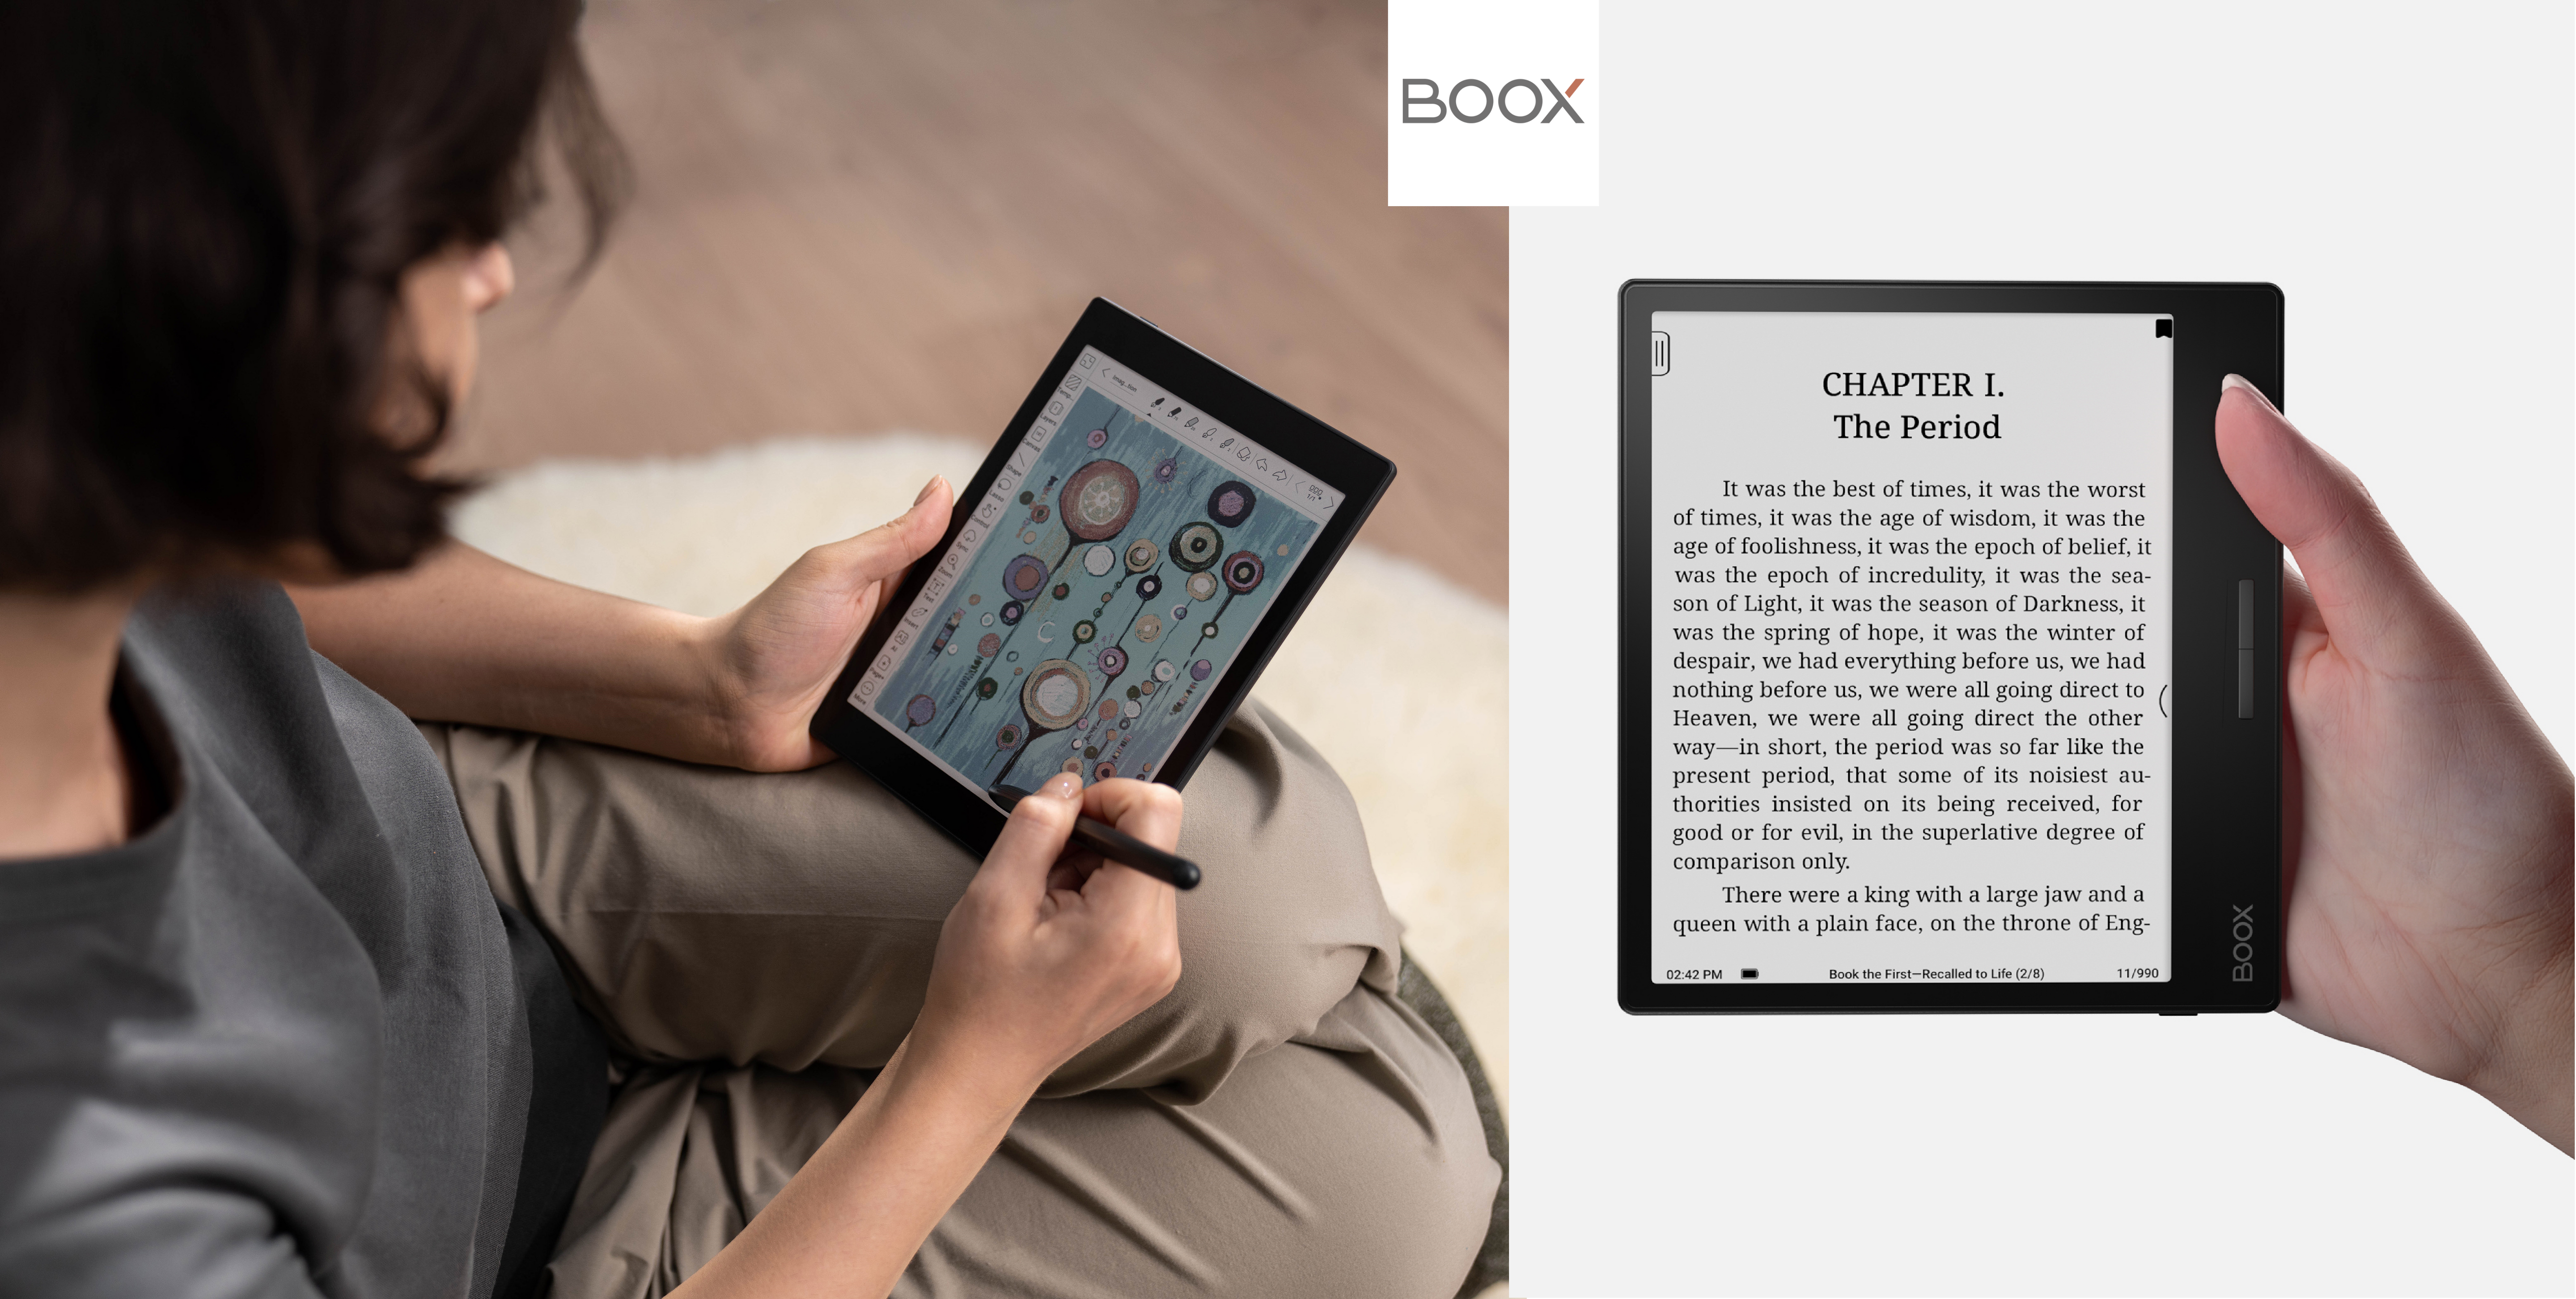 Onyx Boox Tab Mini C review: an ereader that's colorful and